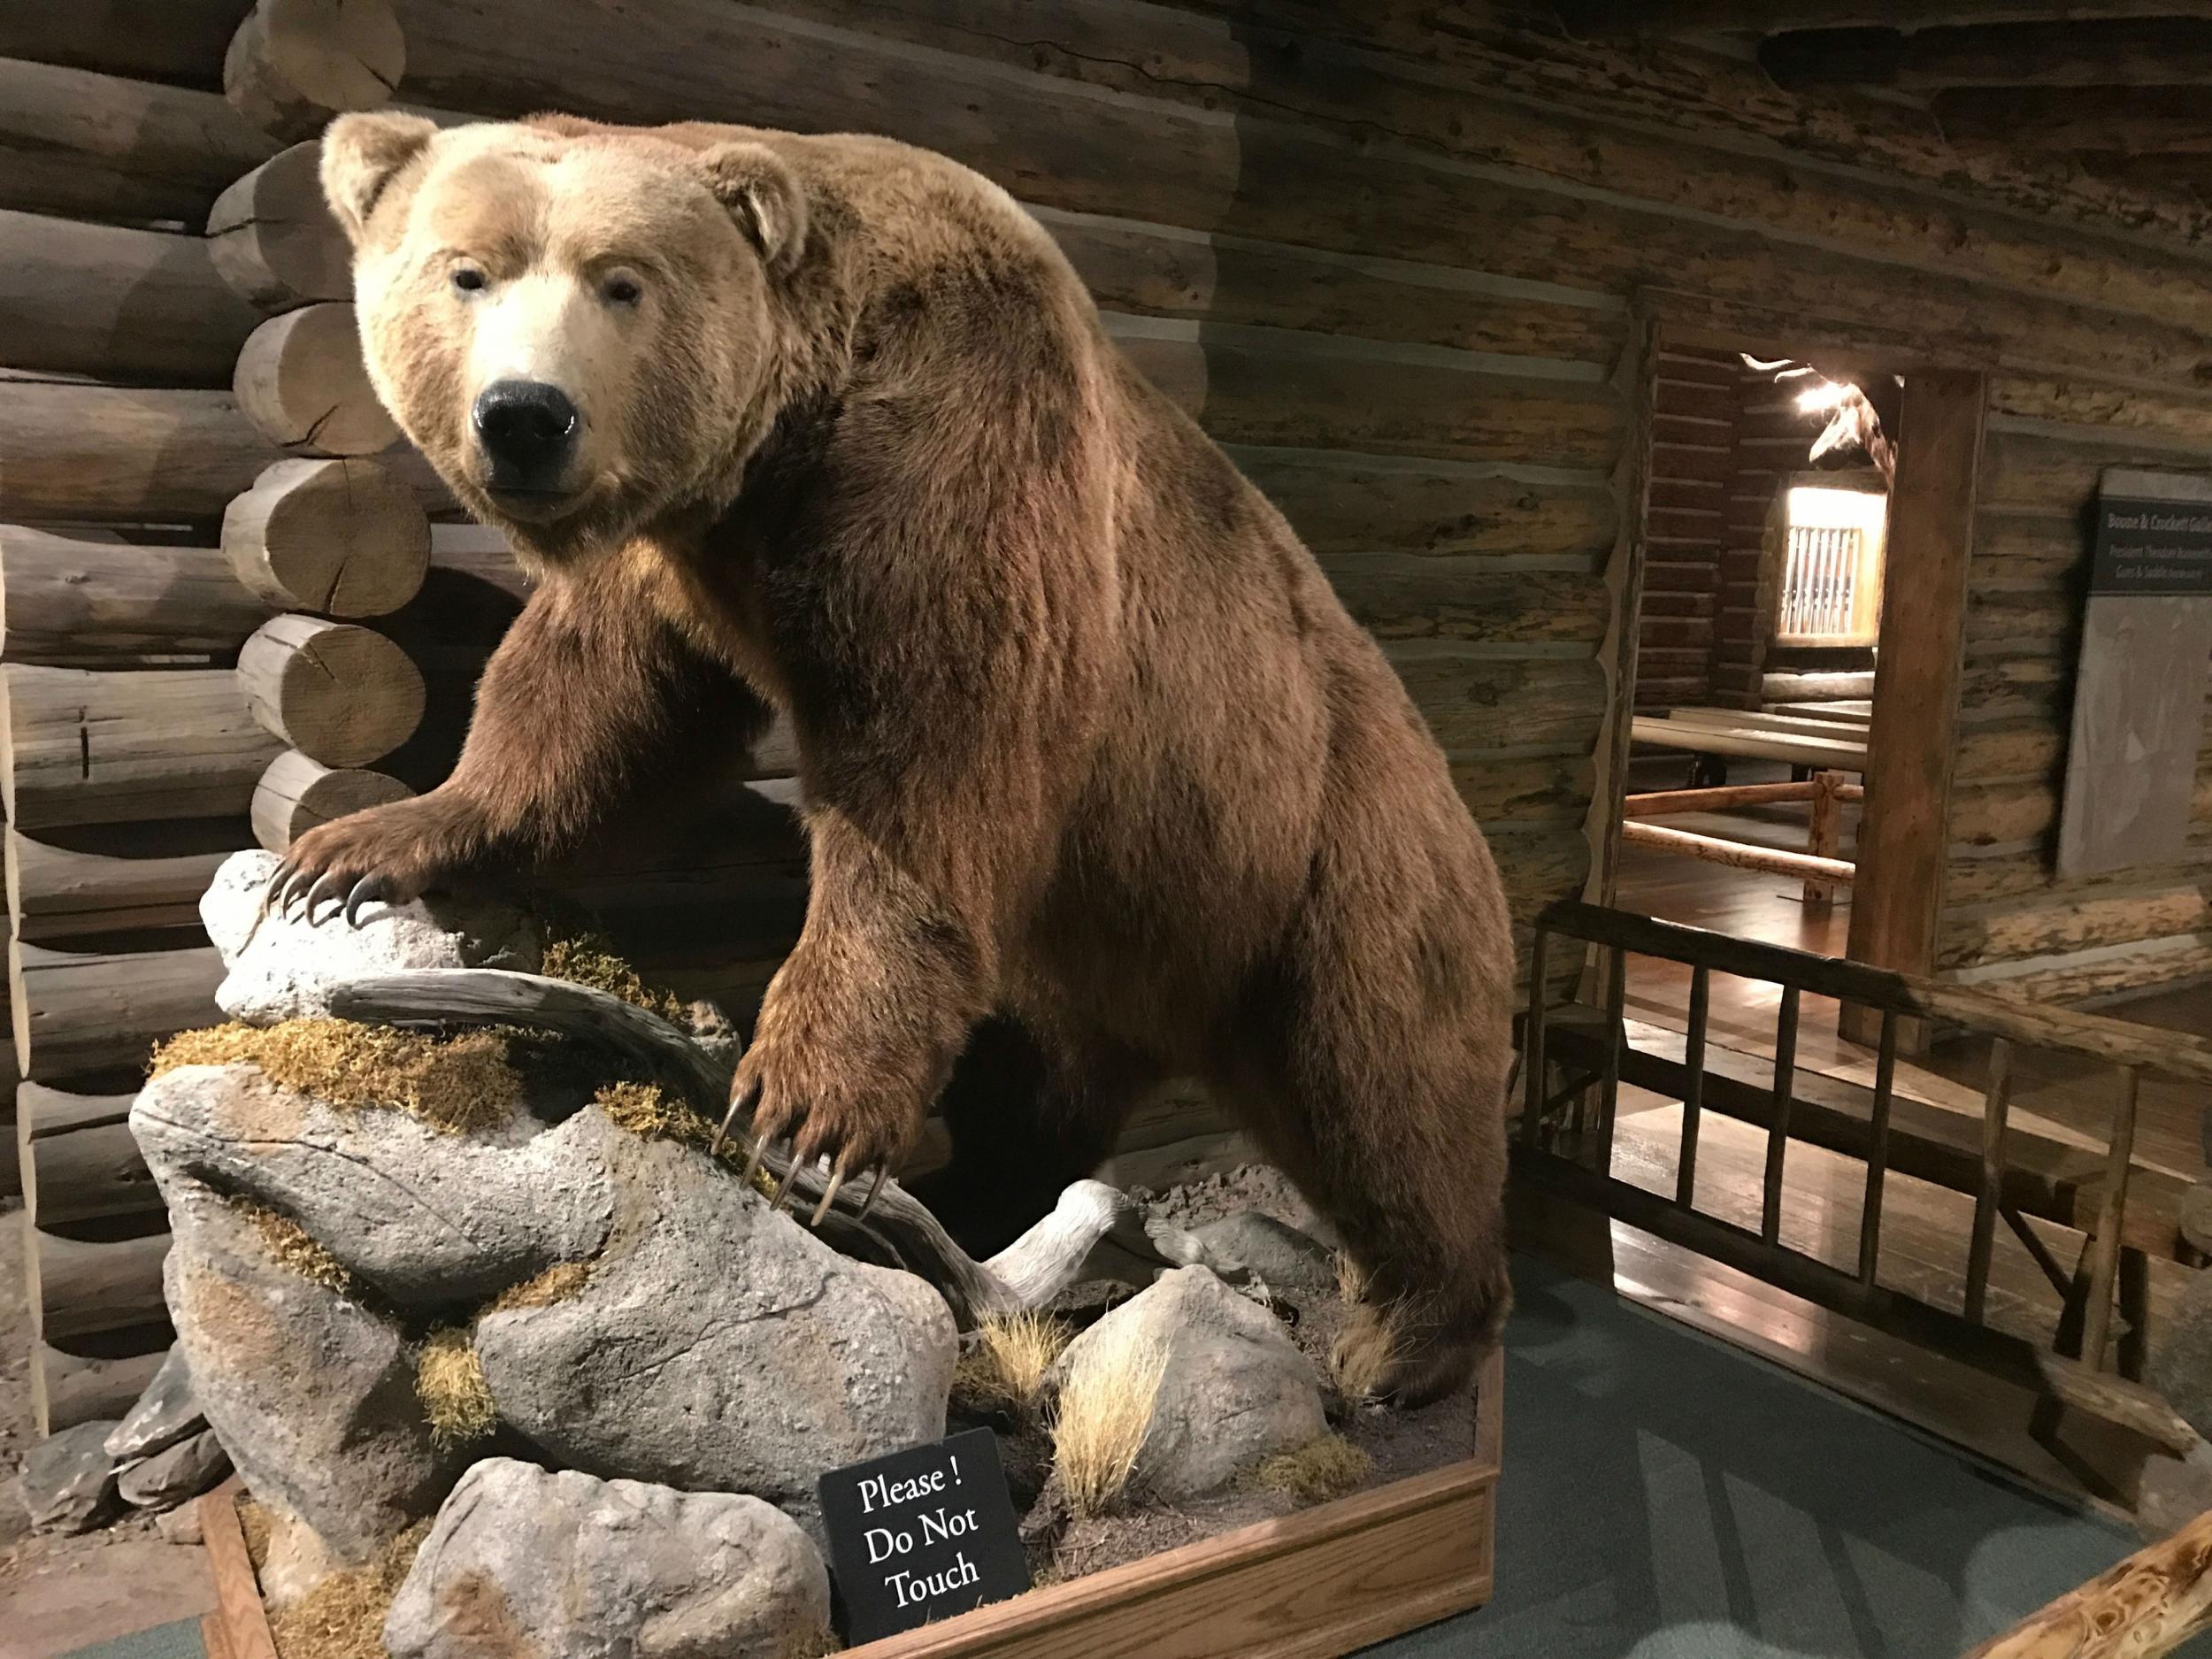 A towering, stuffed grizzly bear welcomes visitors to the Cody Firearms Museum